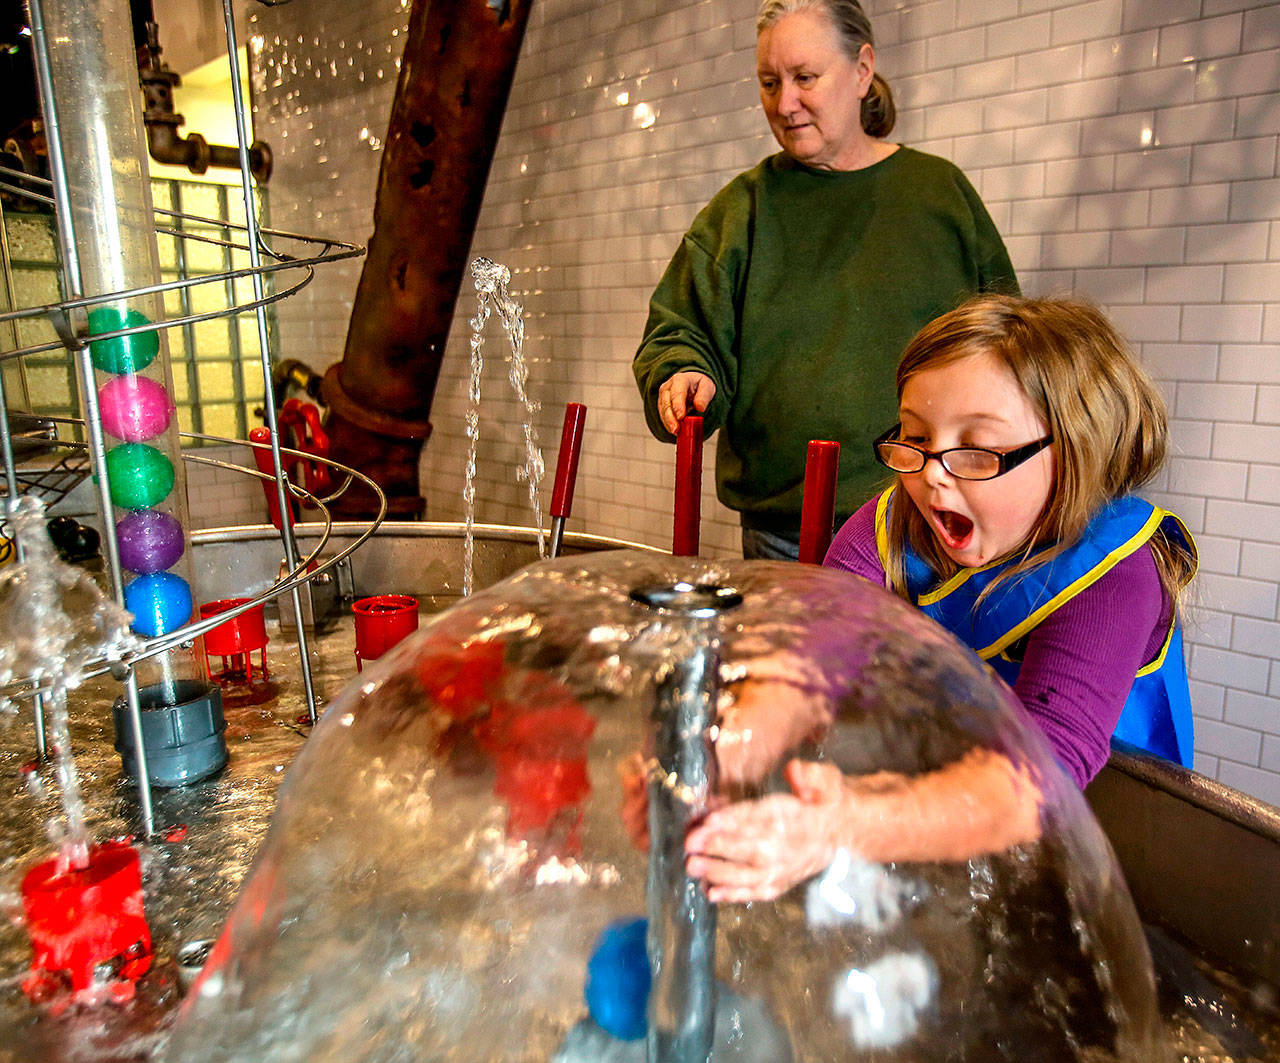 With “adopted grandmother” Michele Tanis at her side, Madison Davis, then 6, of Snohomish reacts upon discovering she can reach into an air pocket inside a water feature at the Imagine Children’s Museum in Everett in May. (Dan Bates/Herald file photo)